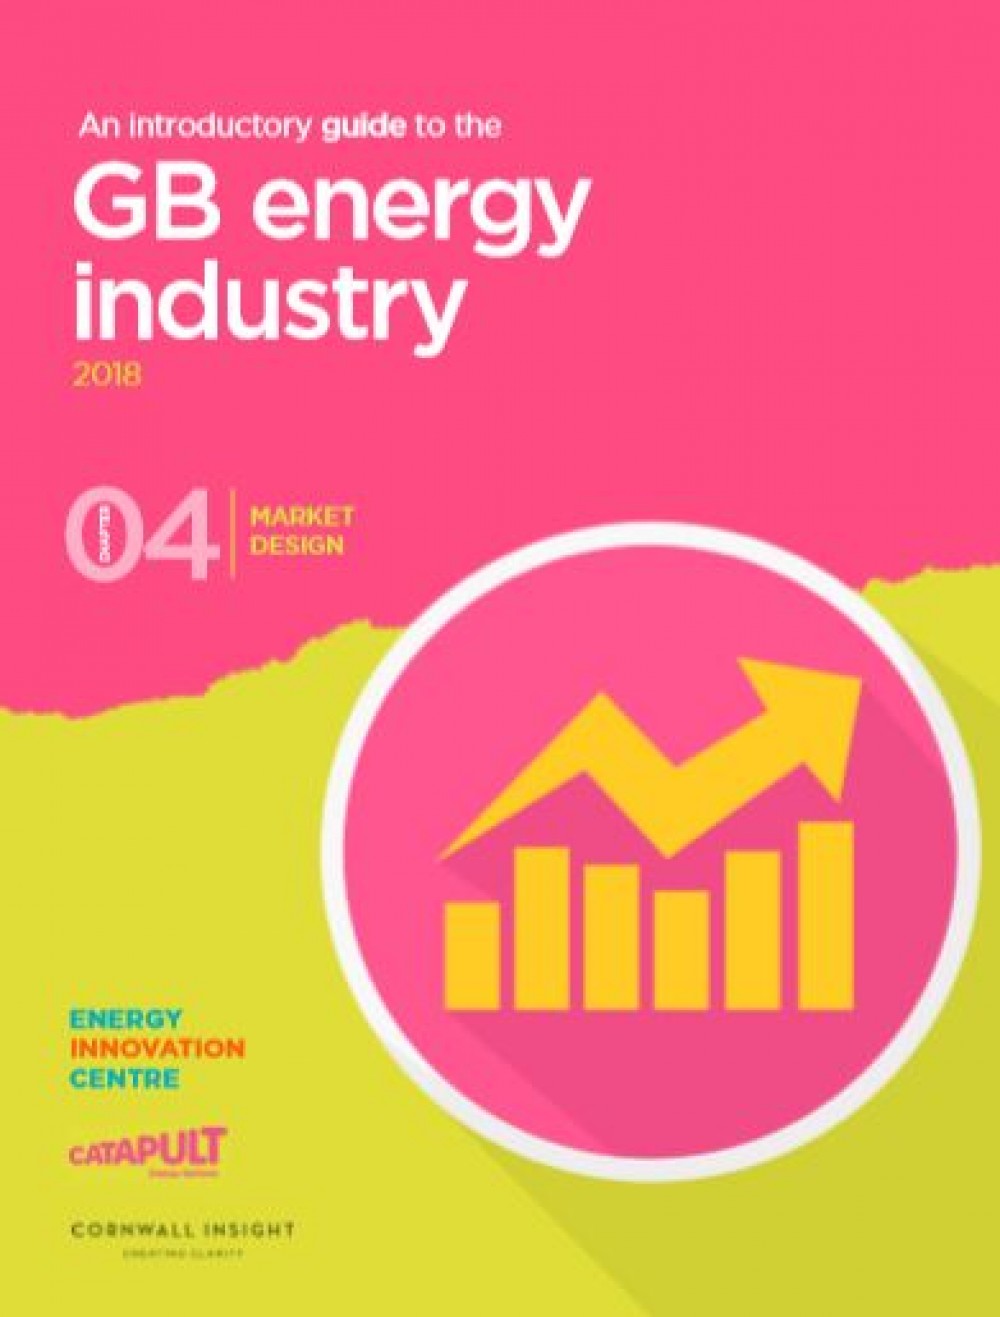 An introductory guide to the GB energy industry: Market design